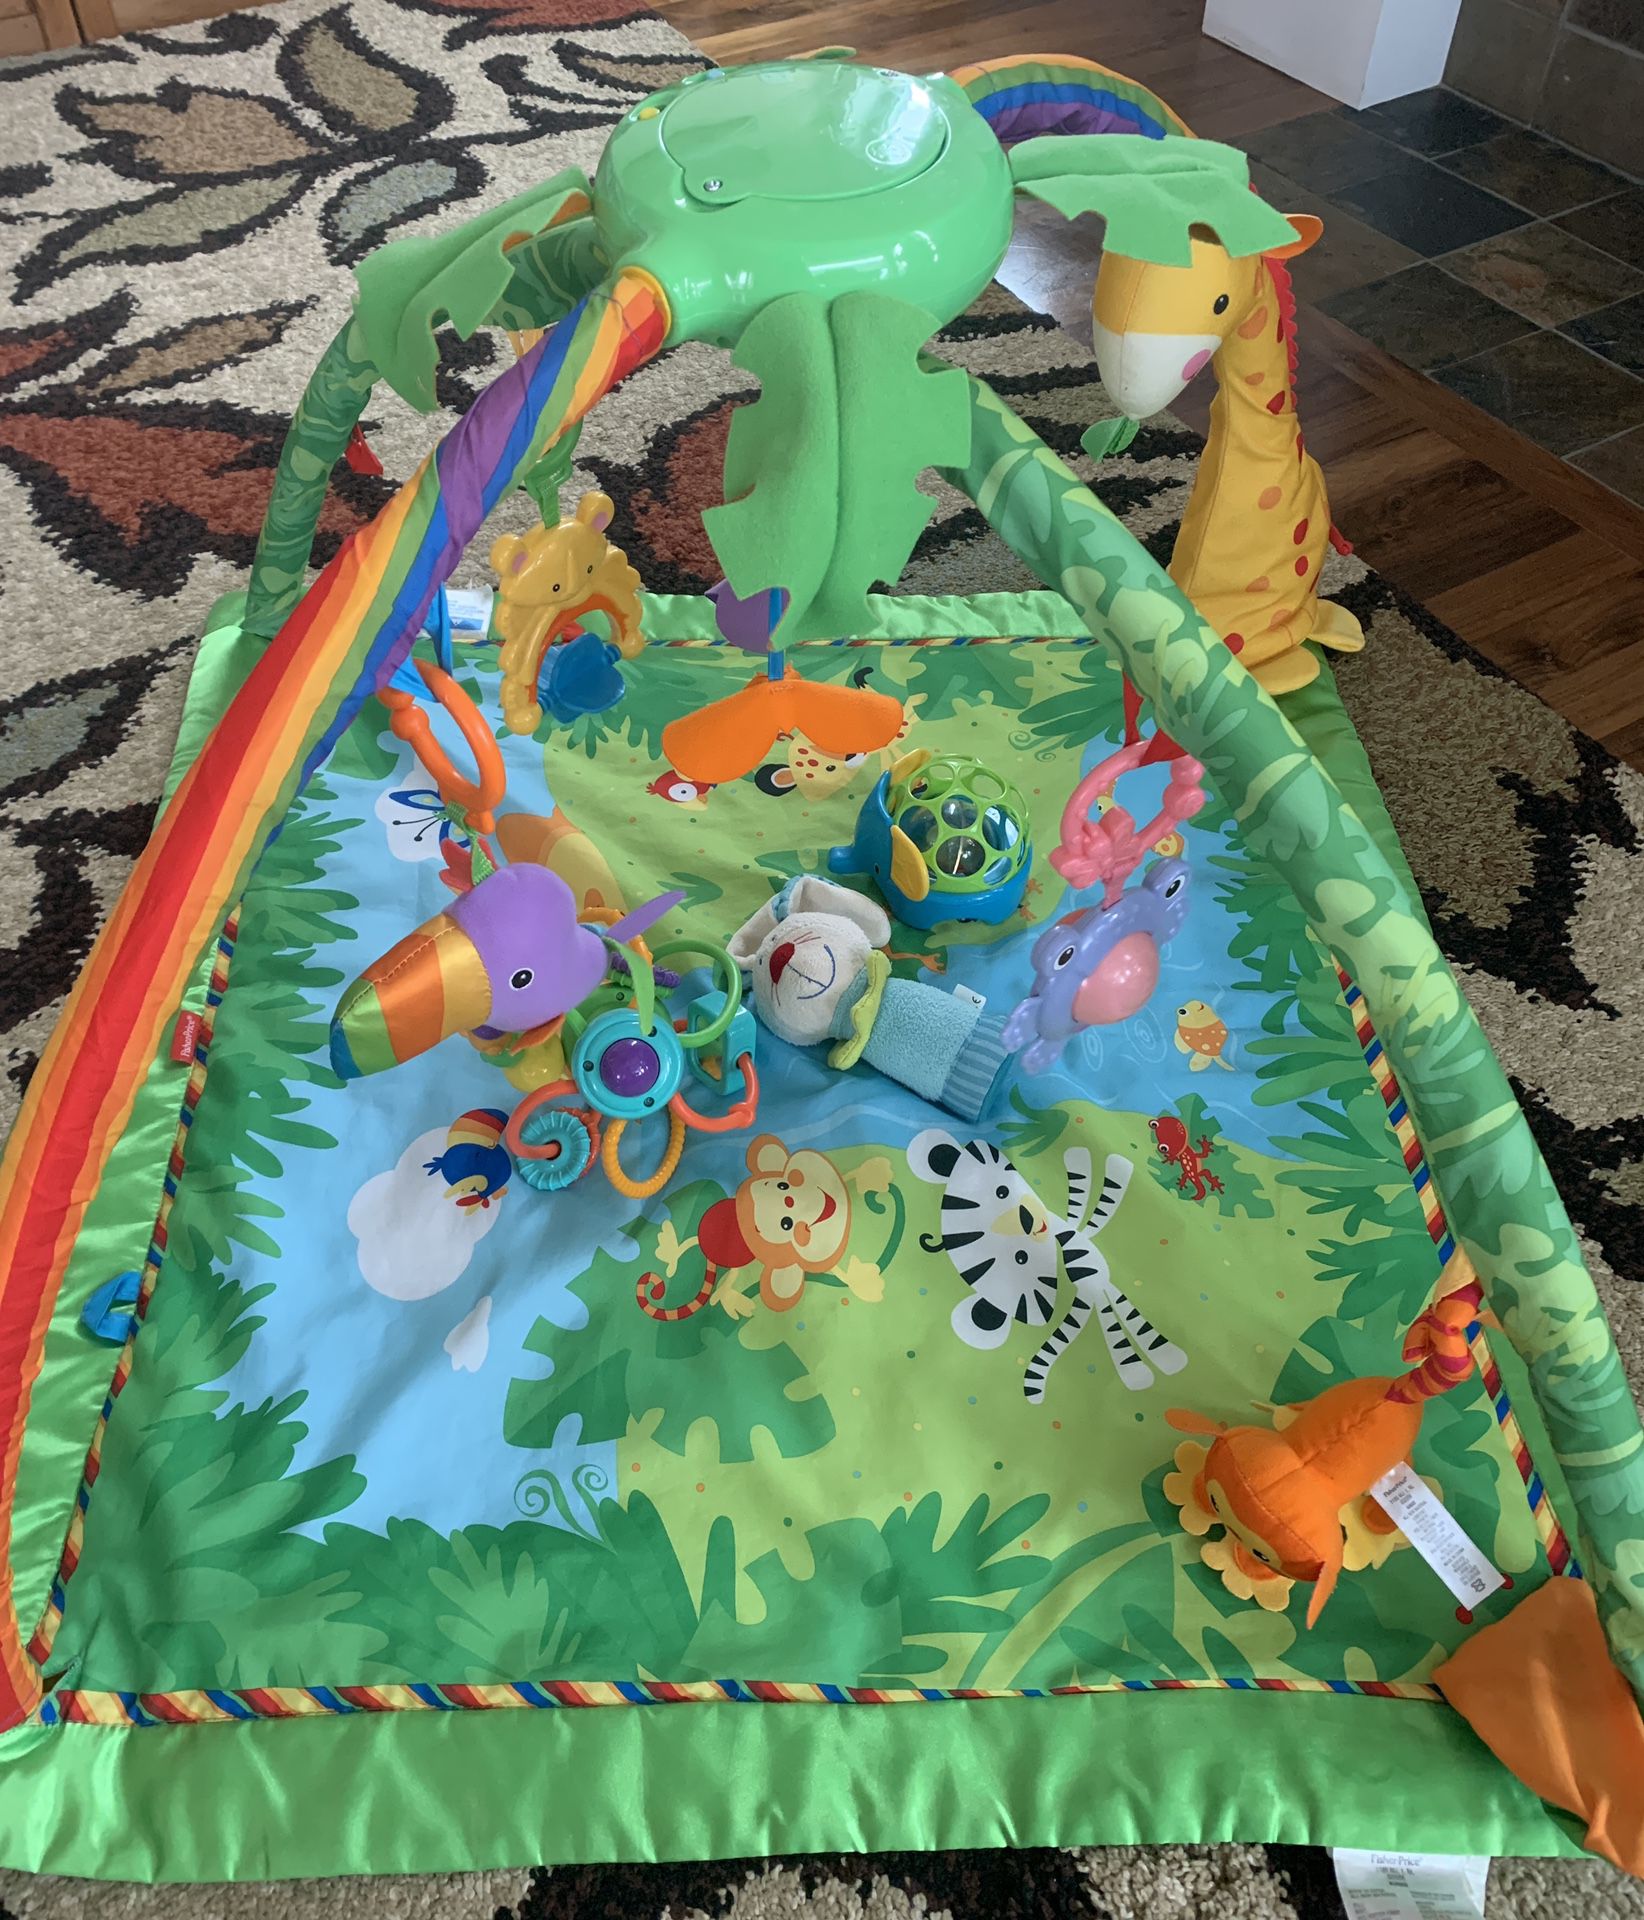 Fishier-Price baby gym playmat with toys